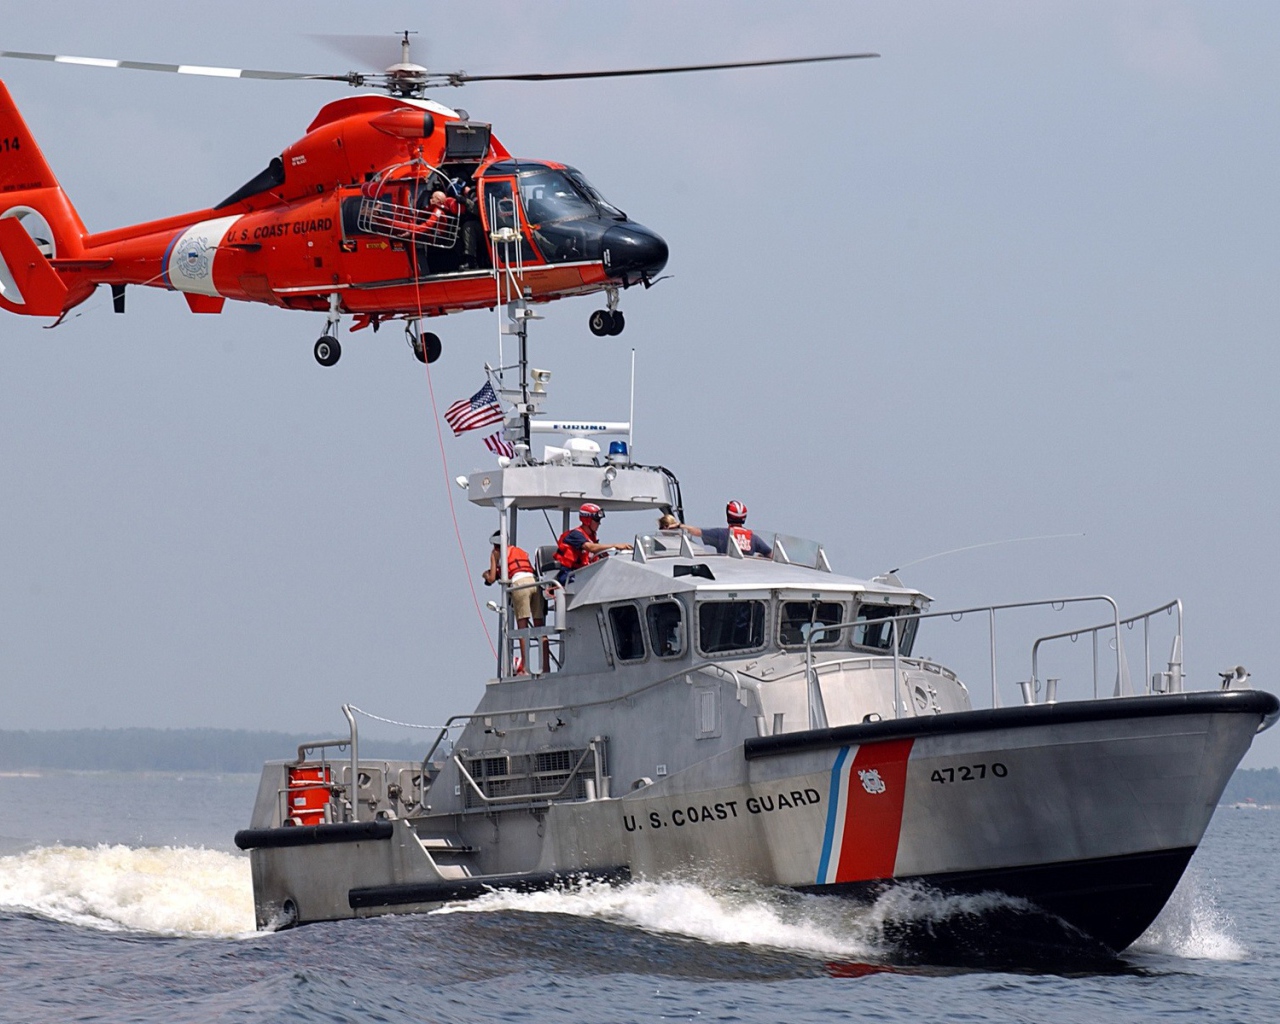 Helicopter and boat USCG